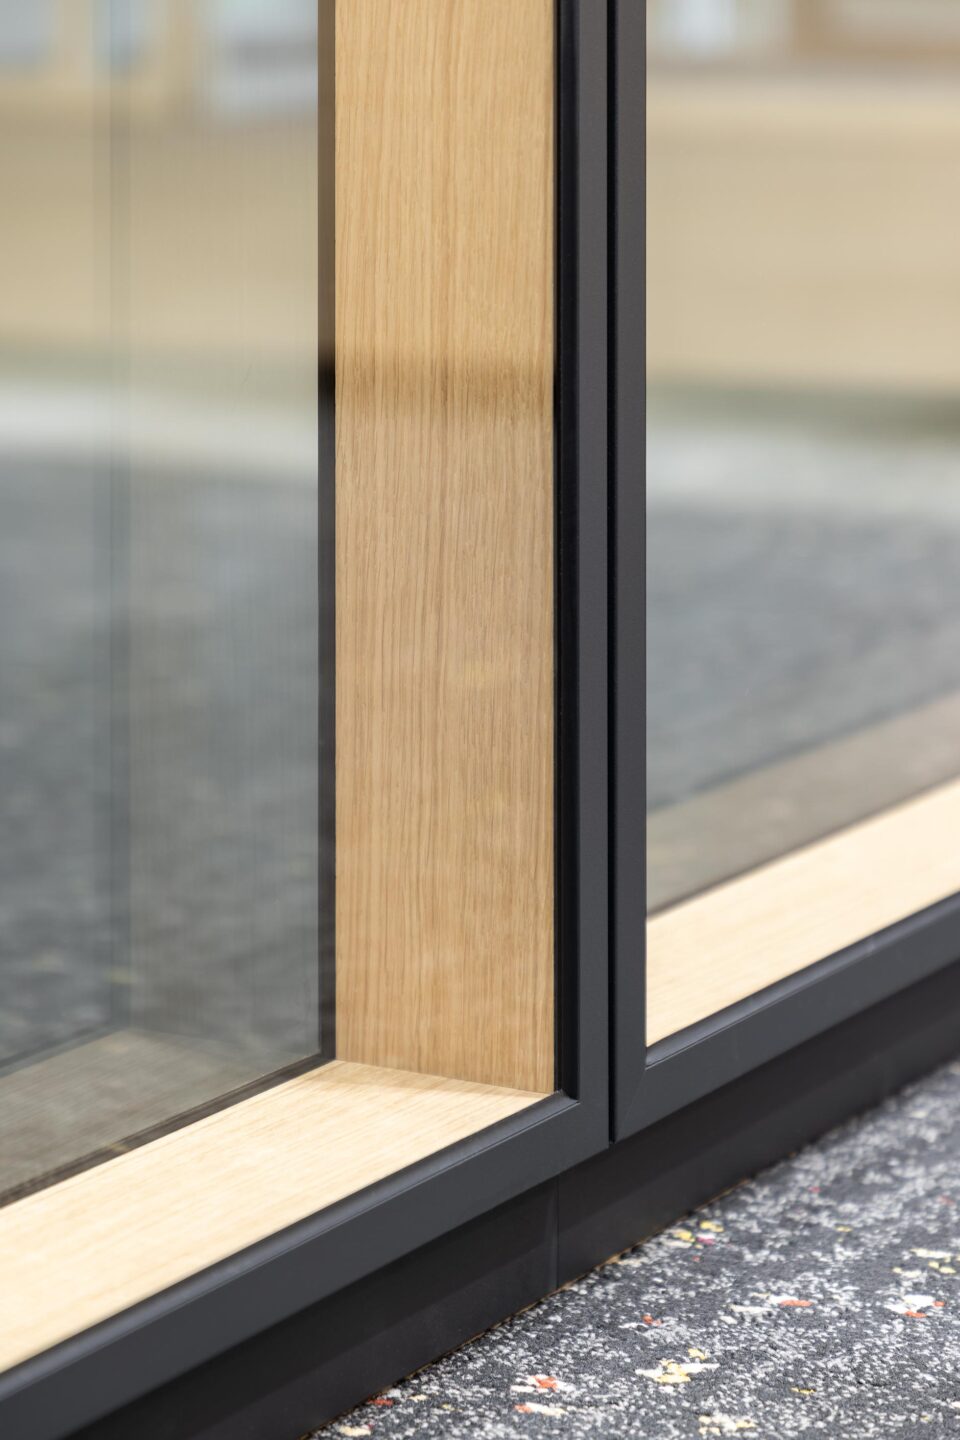 The fecofix Holz and fecostruct Holz glass walls feature oak real-wood surfaces in the inner frame of the inter-pane space.